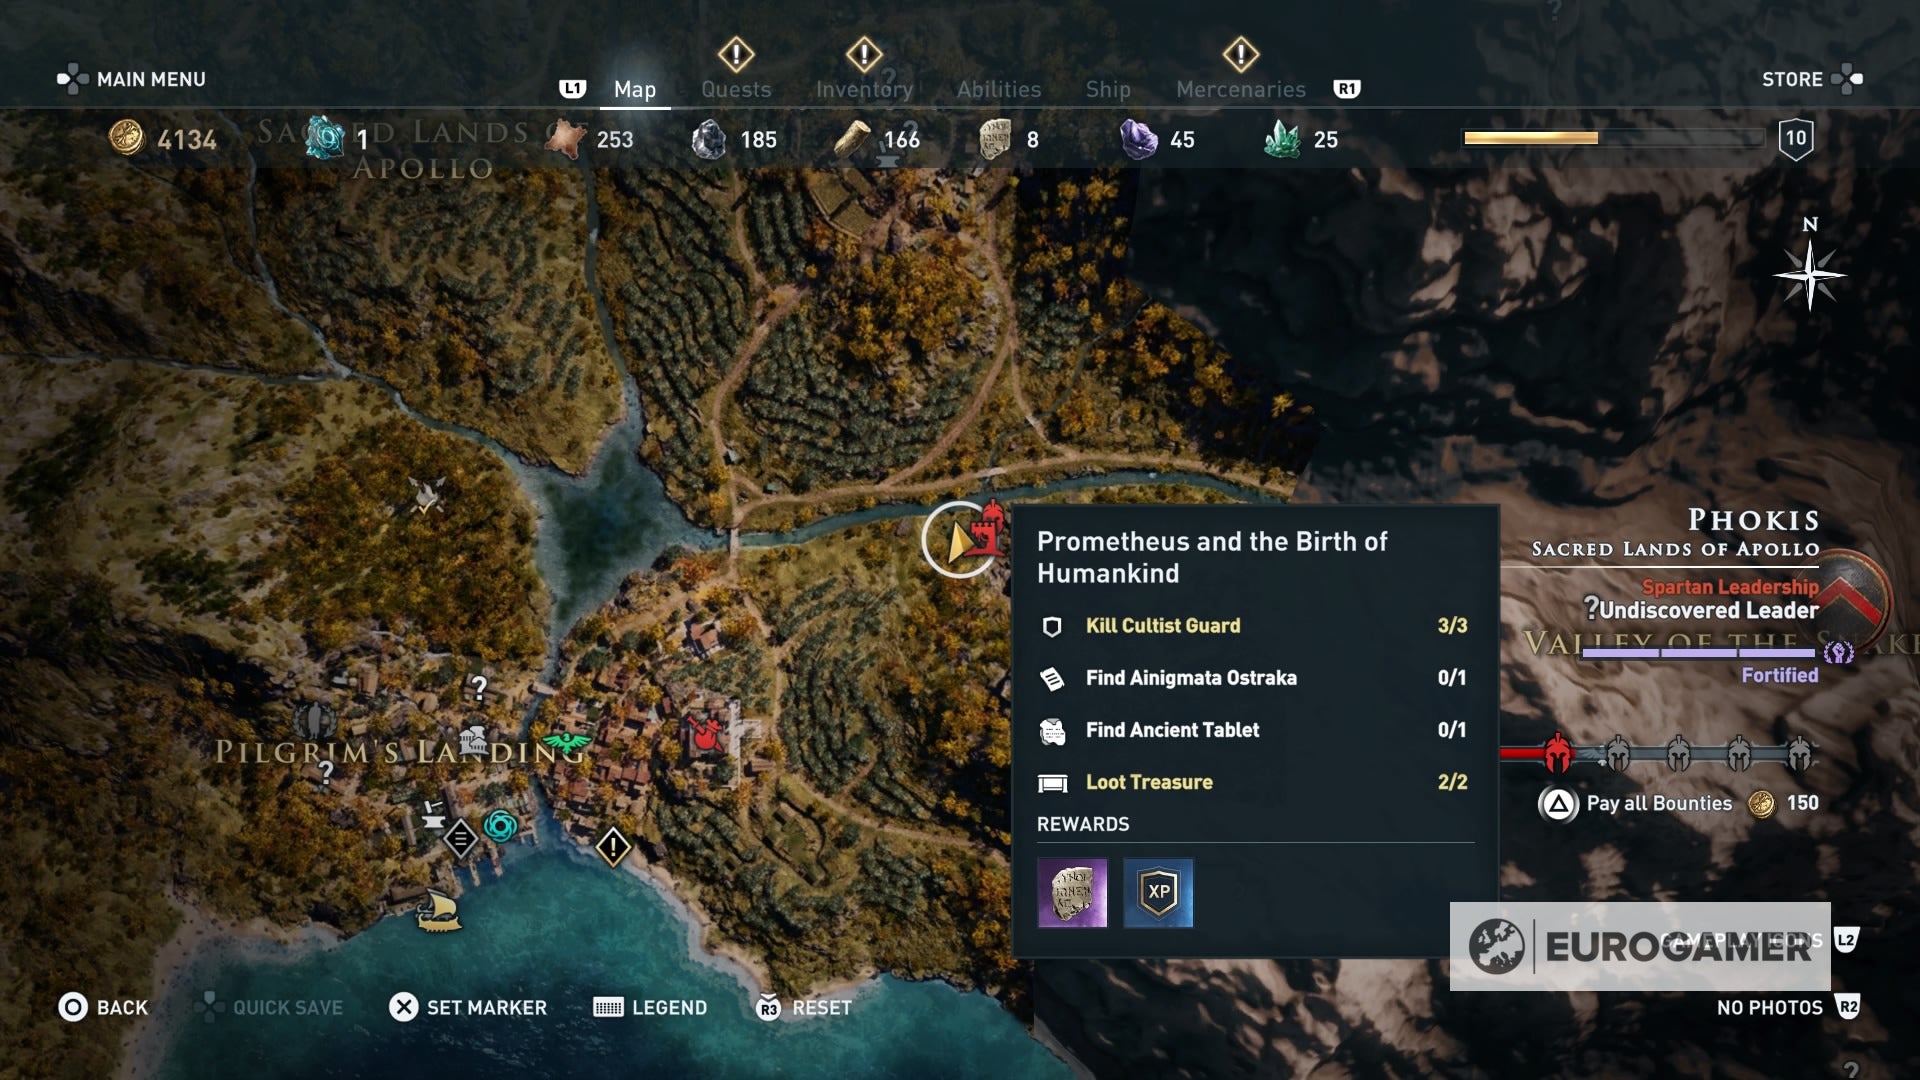 Assassin's Creed Odyssey - Pressed for Time, A Finger Tip riddle solutions and where to find the Sacred Lands of Despina Fort tablets | Eurogamer.net